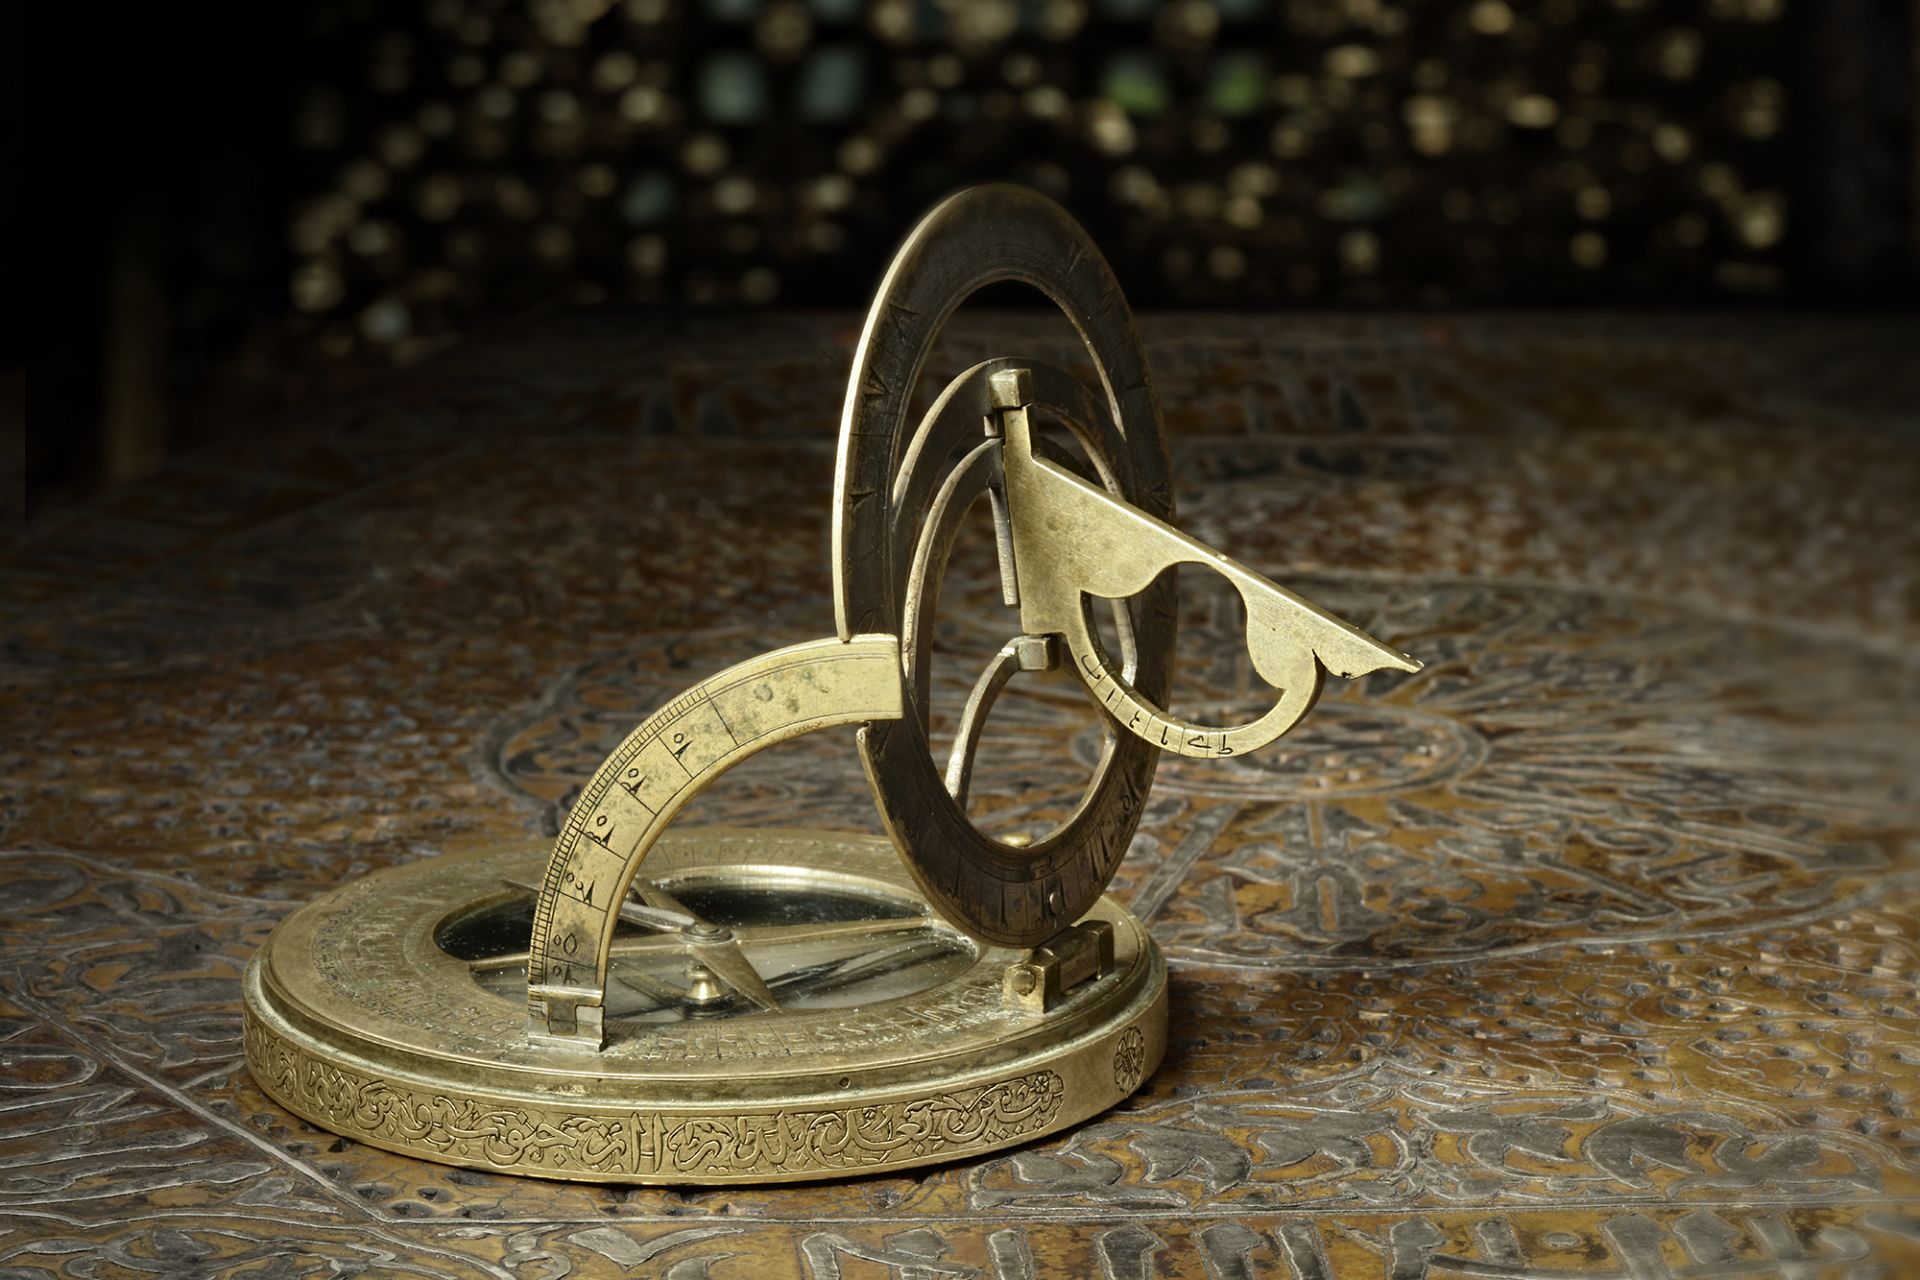 A RARE PERSIAN QIBLA FINDER FITTED WITH A EUROPEAN STYLE "UNIVERSAL" SUNDIAL, 18TH CENTURY - Image 2 of 9